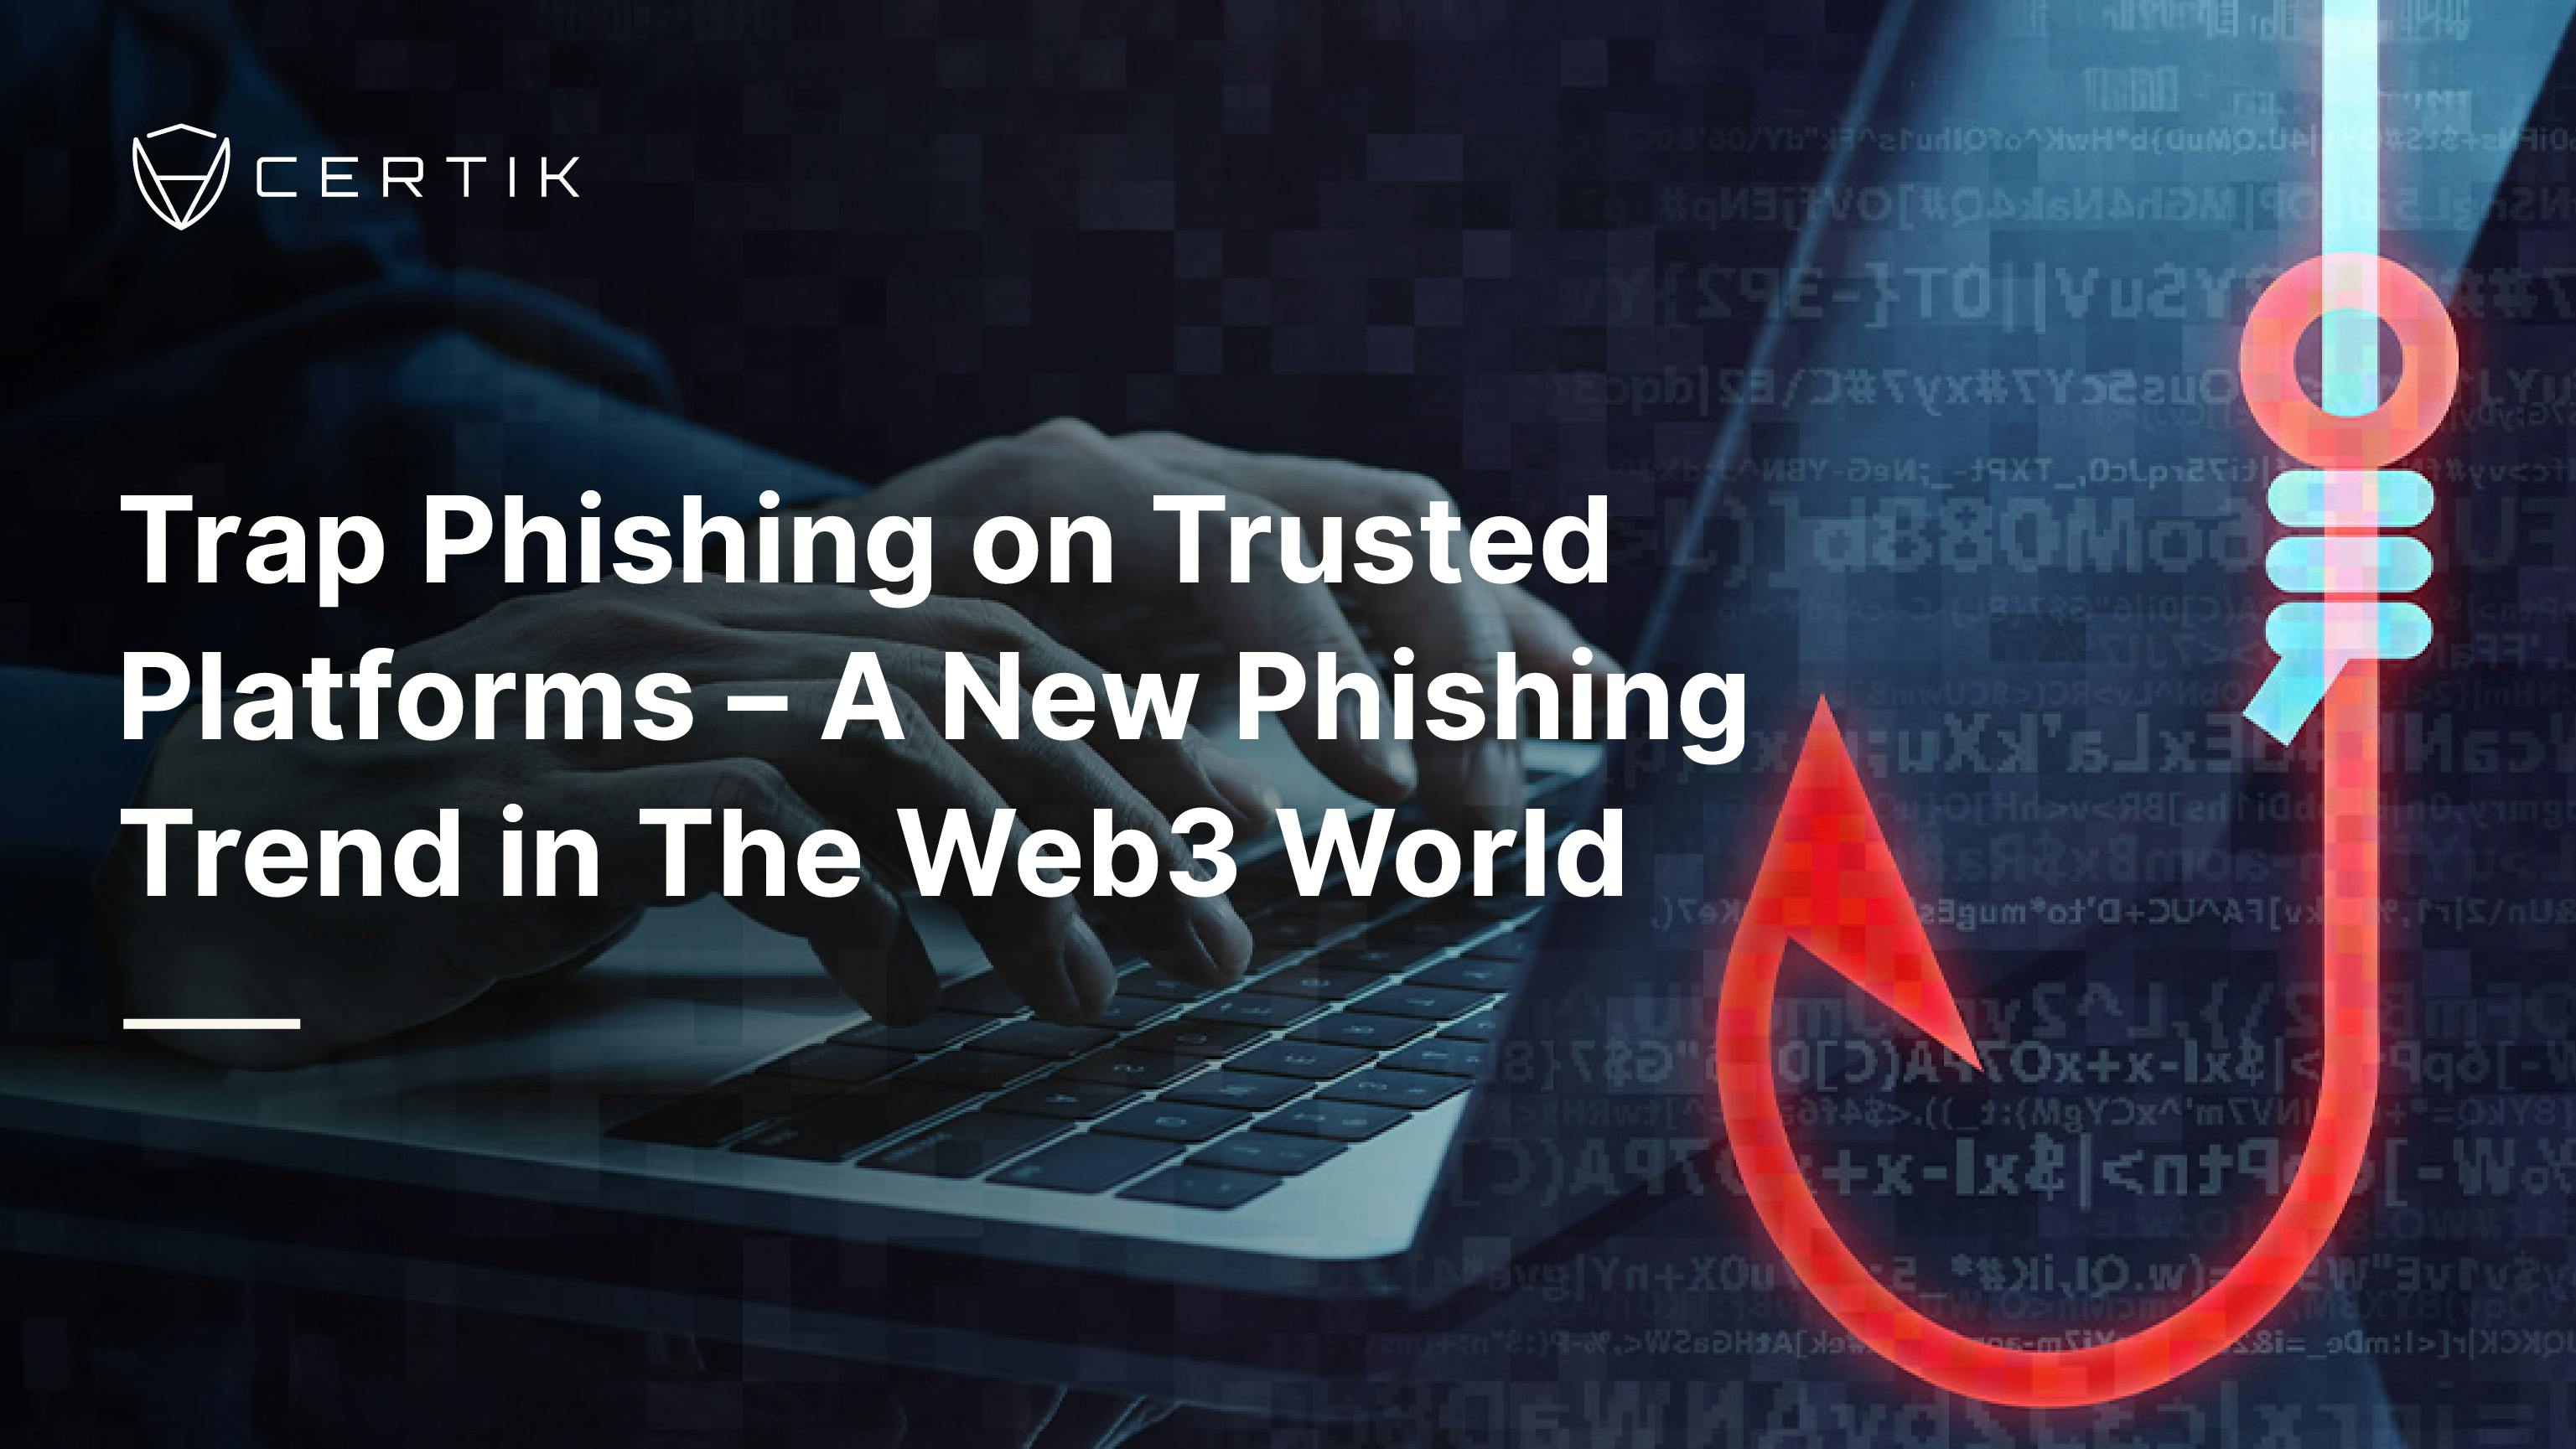 Trap Phishing on Trusted Platforms: A New Phishing Trend in The Web3 World